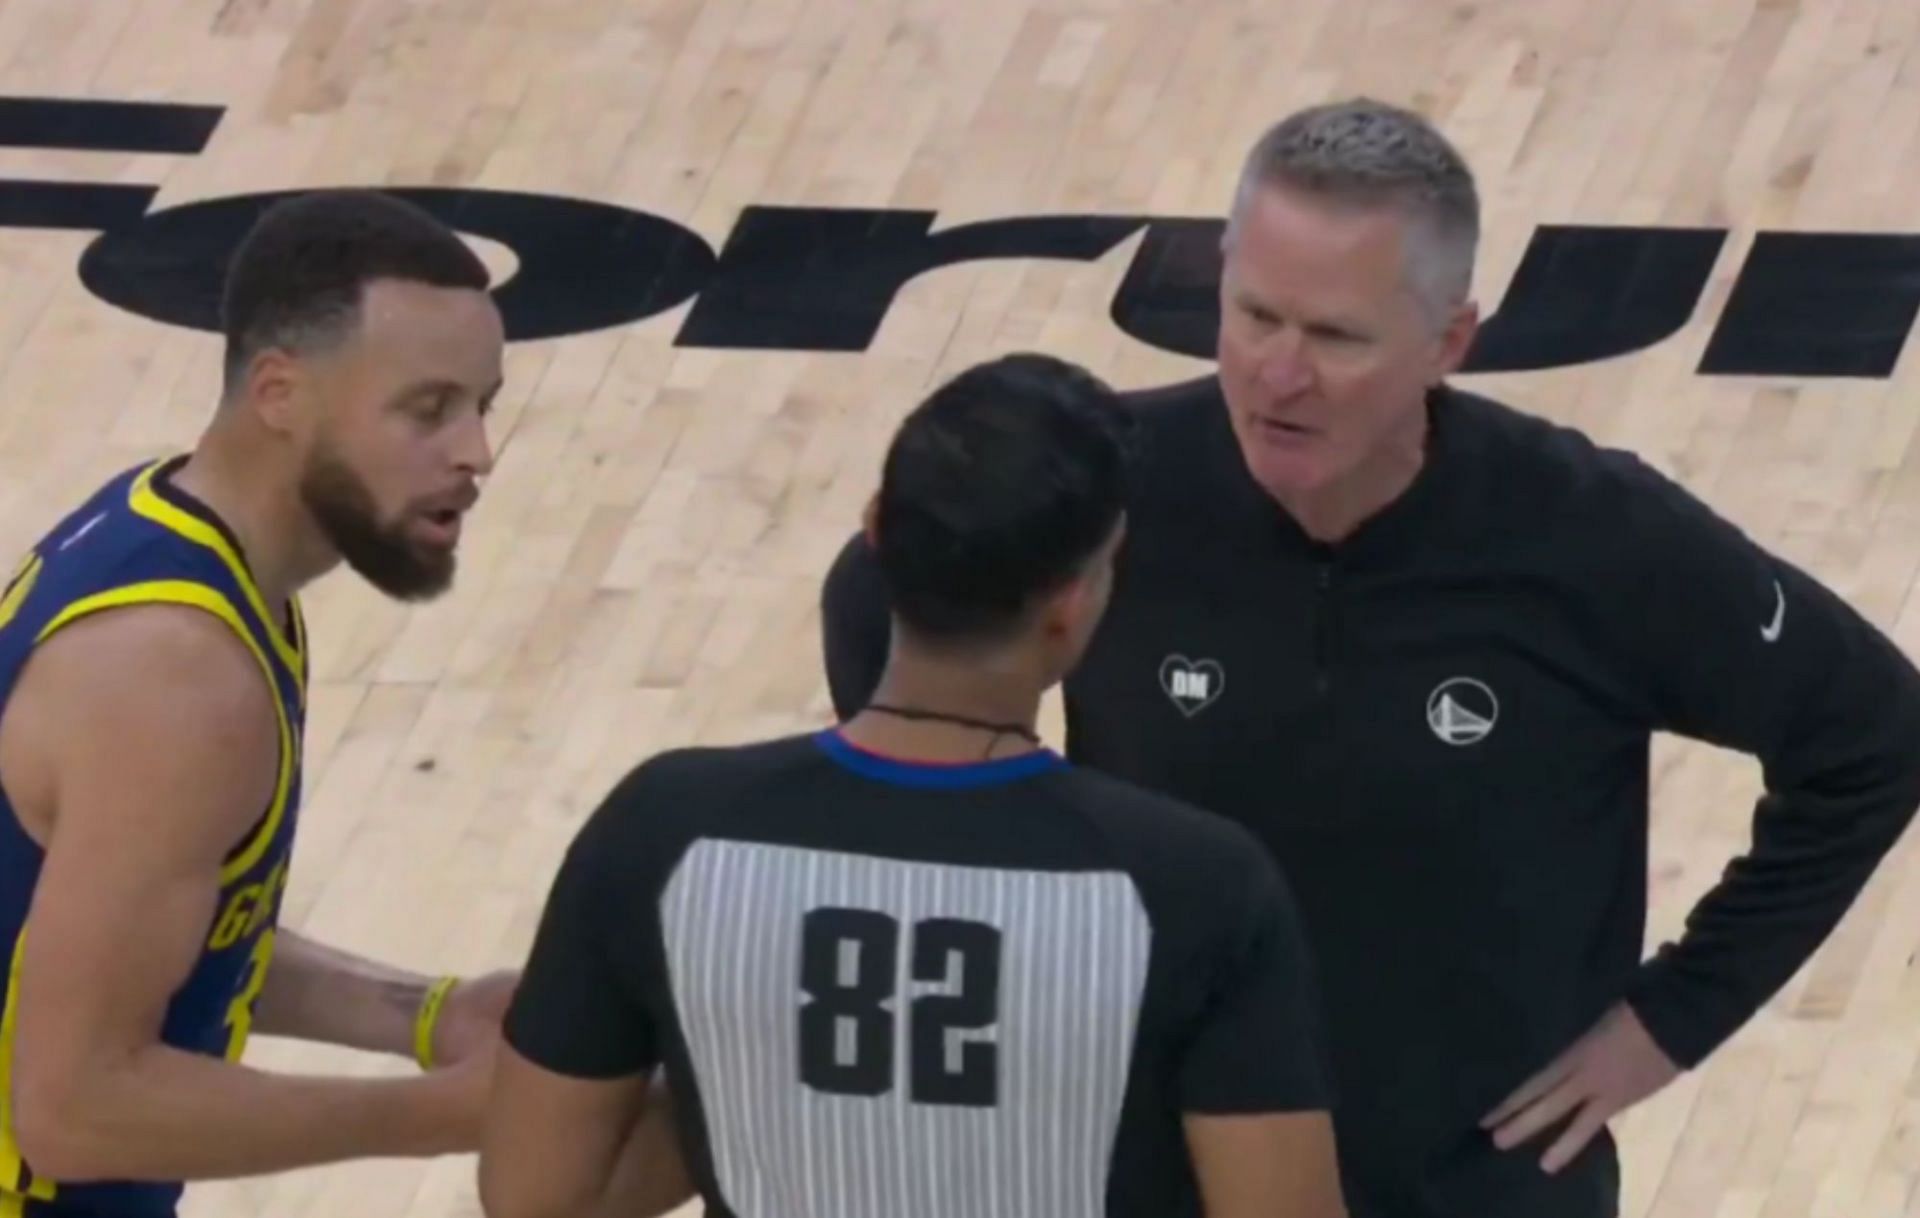 Steph Curry recieved a techincal foul complaining that the referees missed a foul call after Steph Curry went on the ground